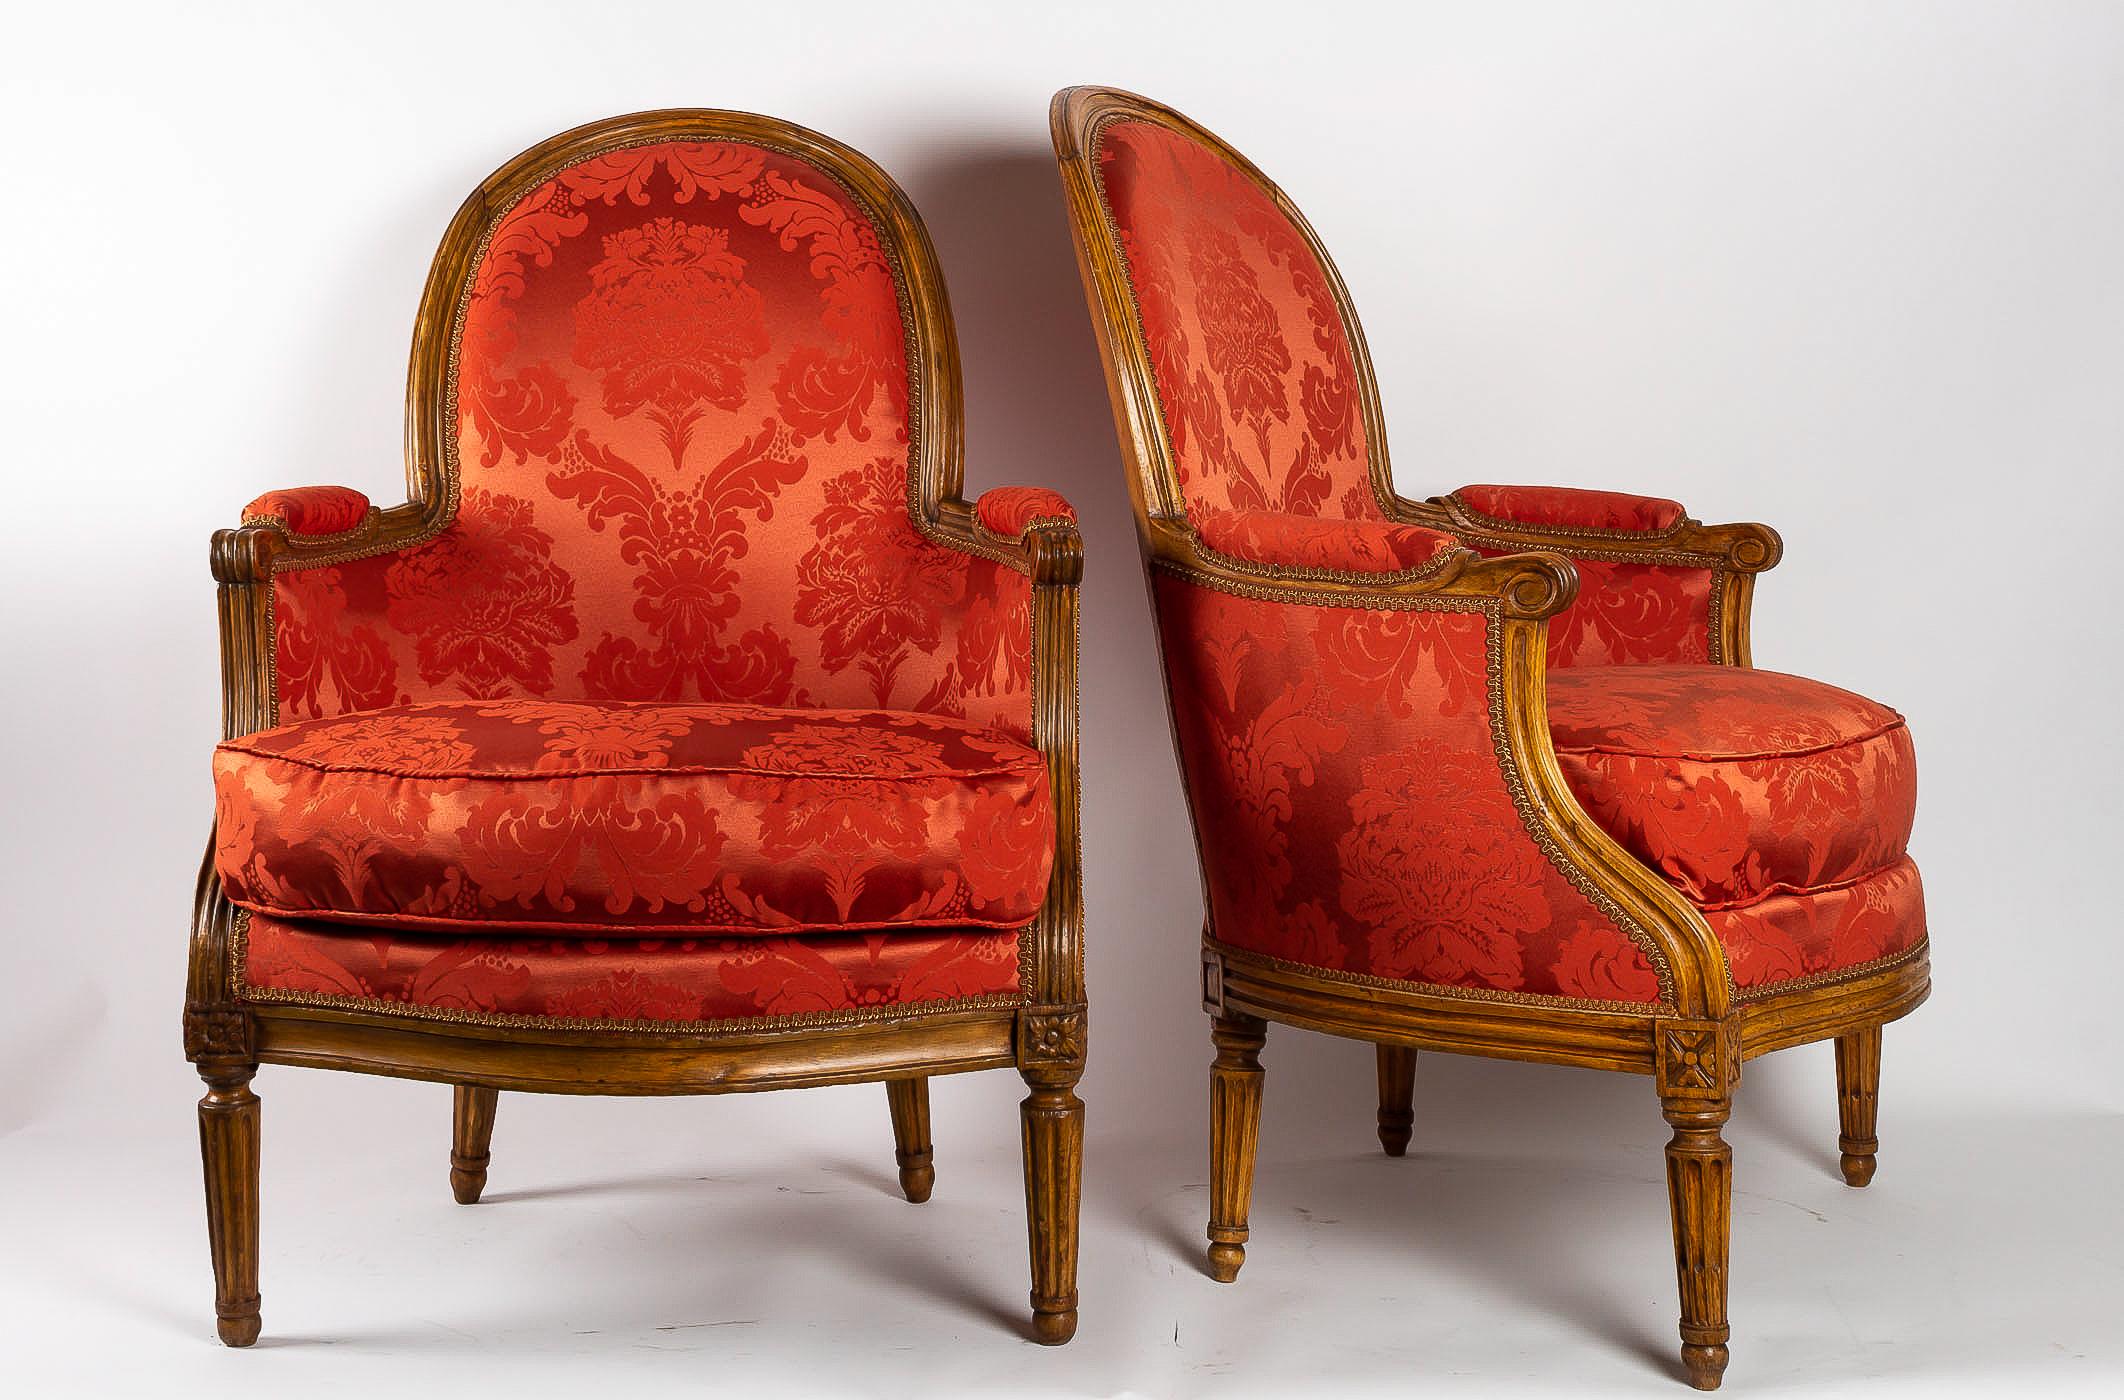 Carved French Louis XVI Period Set of Two Bergeres, circa 1780